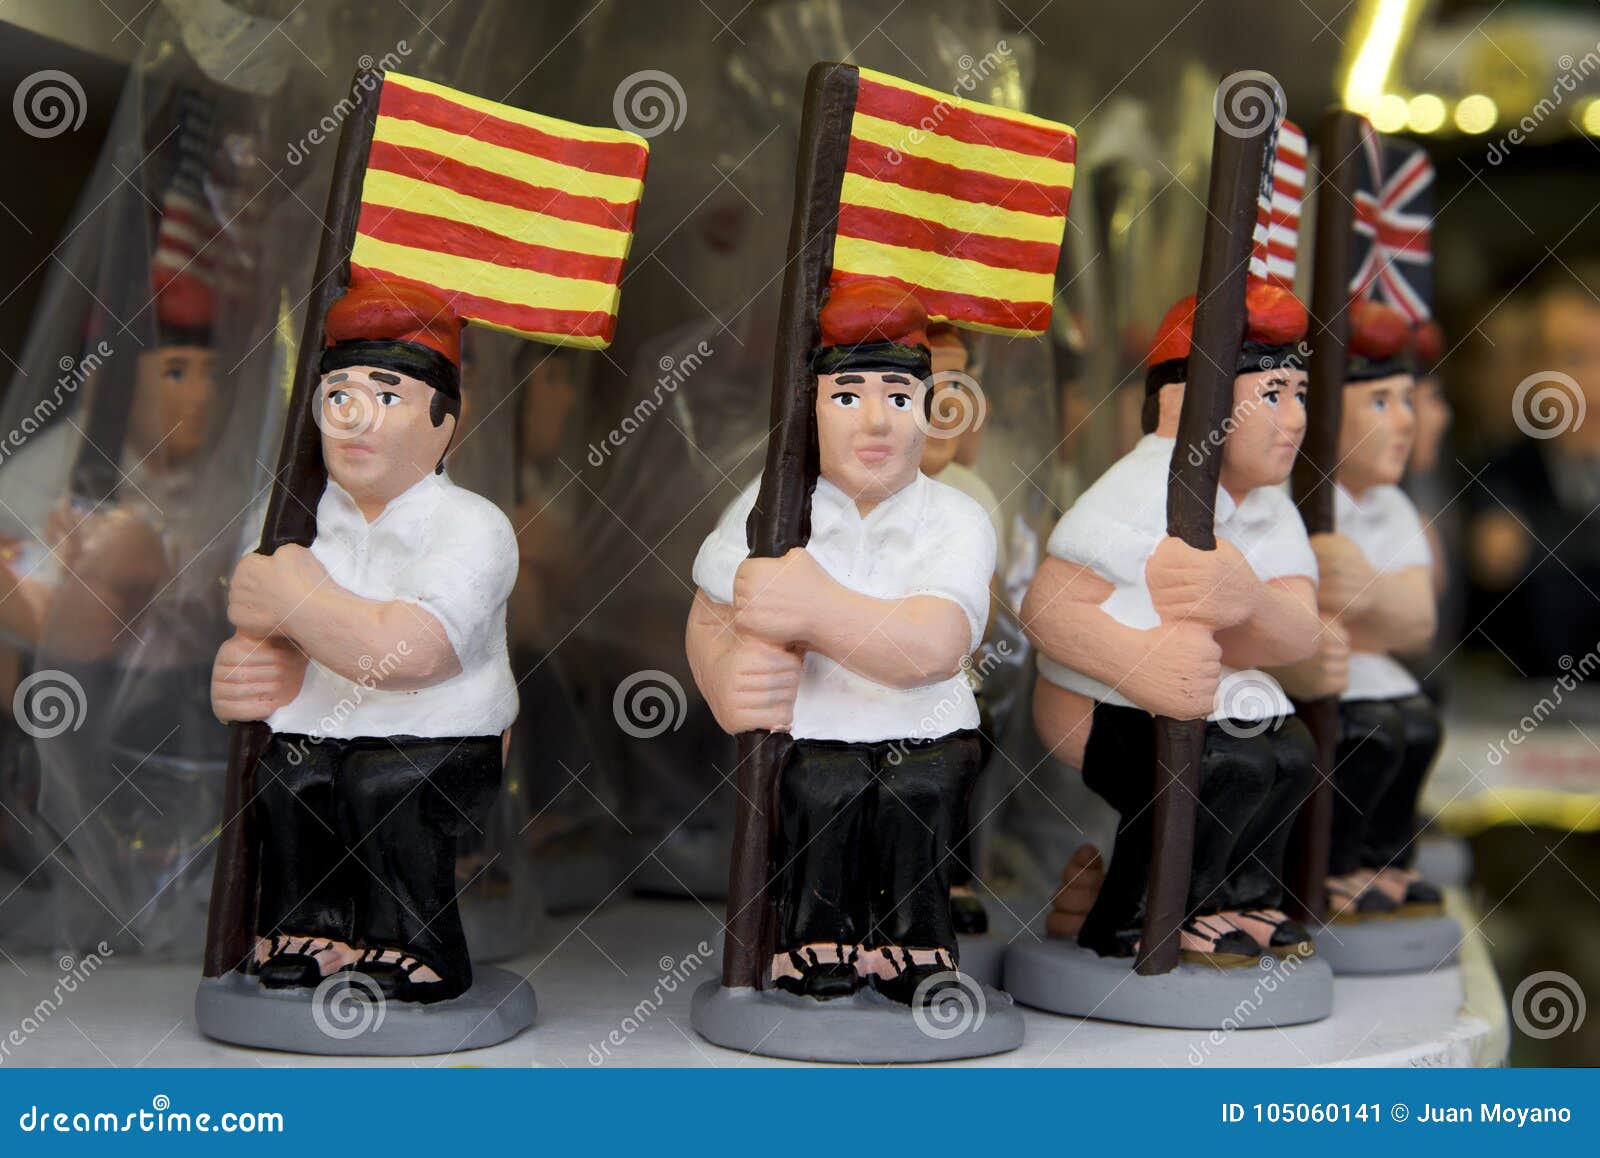 caganer, catalan character in the nativity scenes